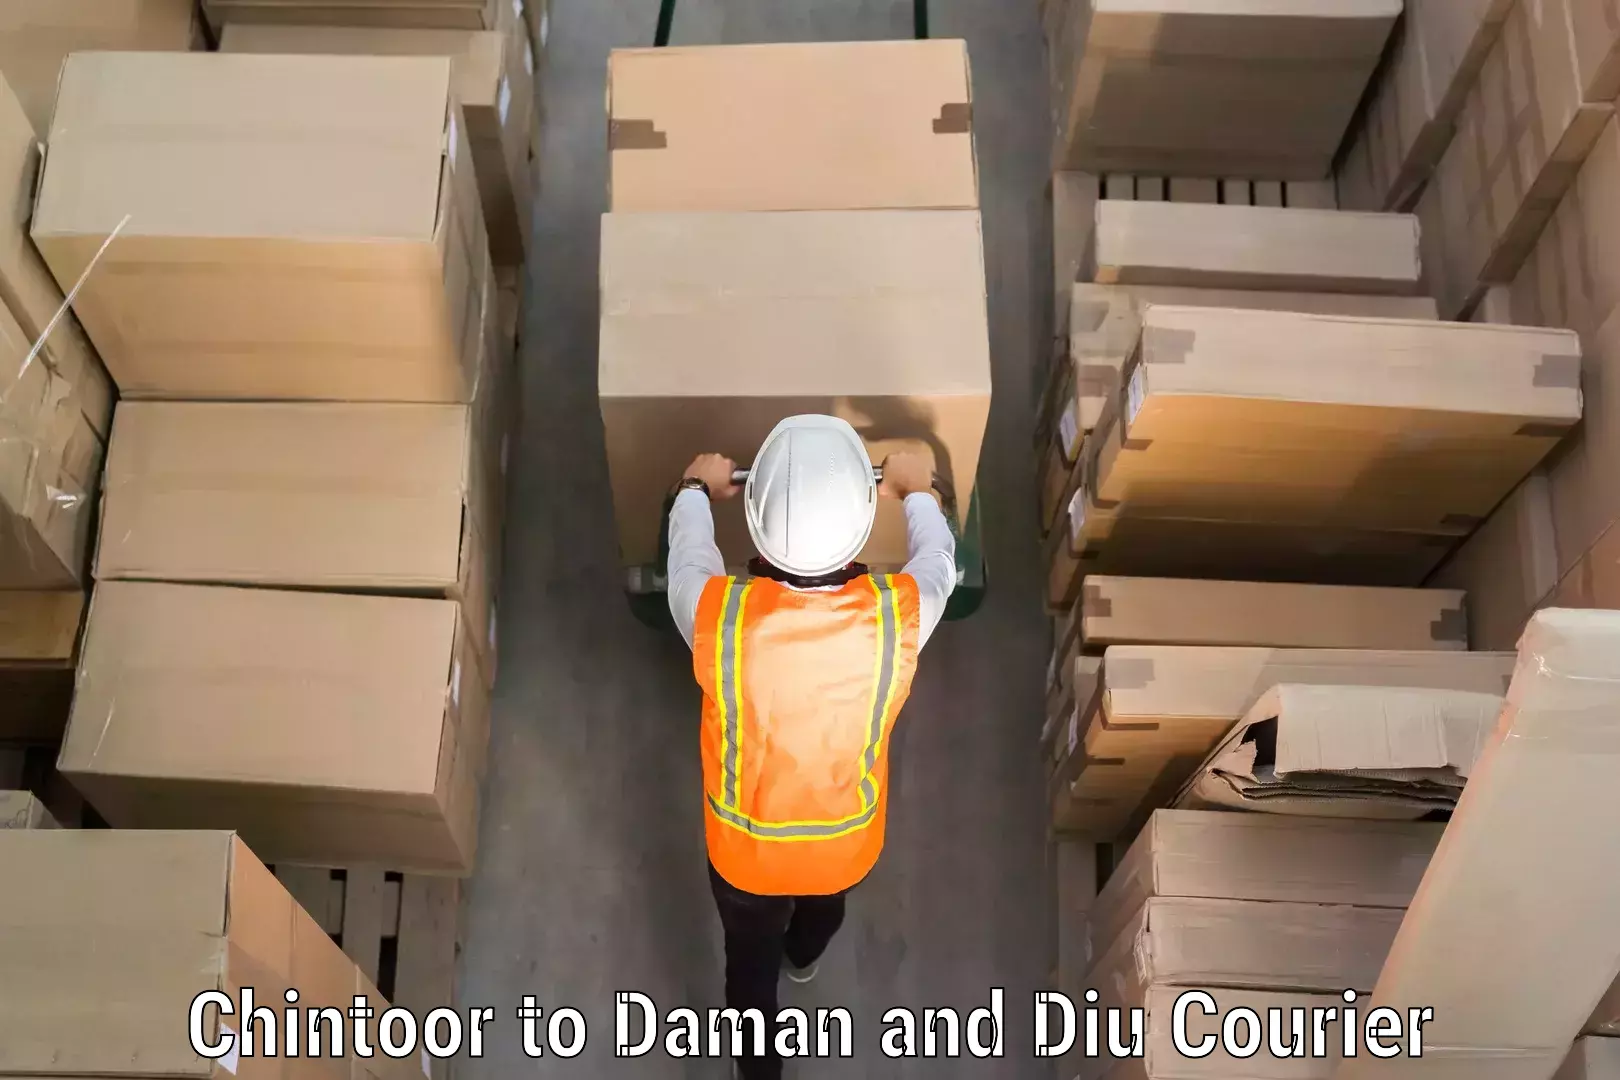 Baggage transport network Chintoor to Daman and Diu